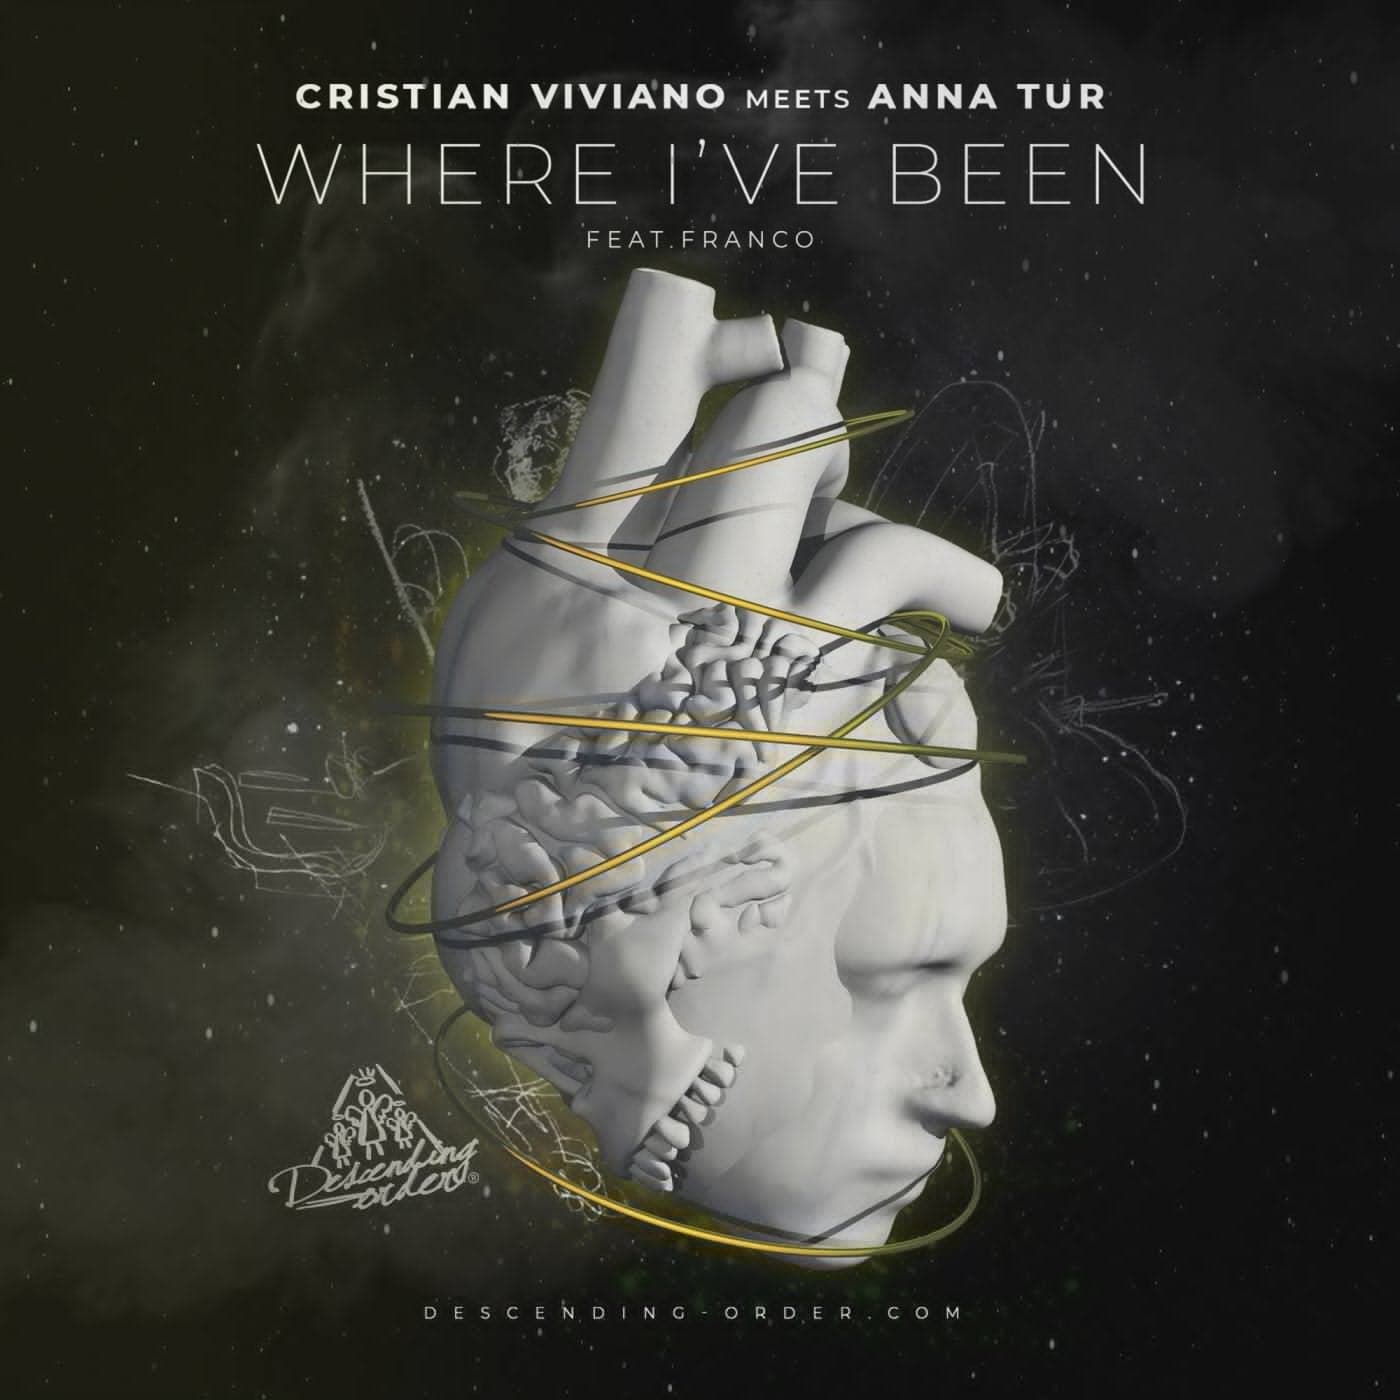 Download Cristian Viviano, Franco, Anna Tur - Where I've Been on Electrobuzz